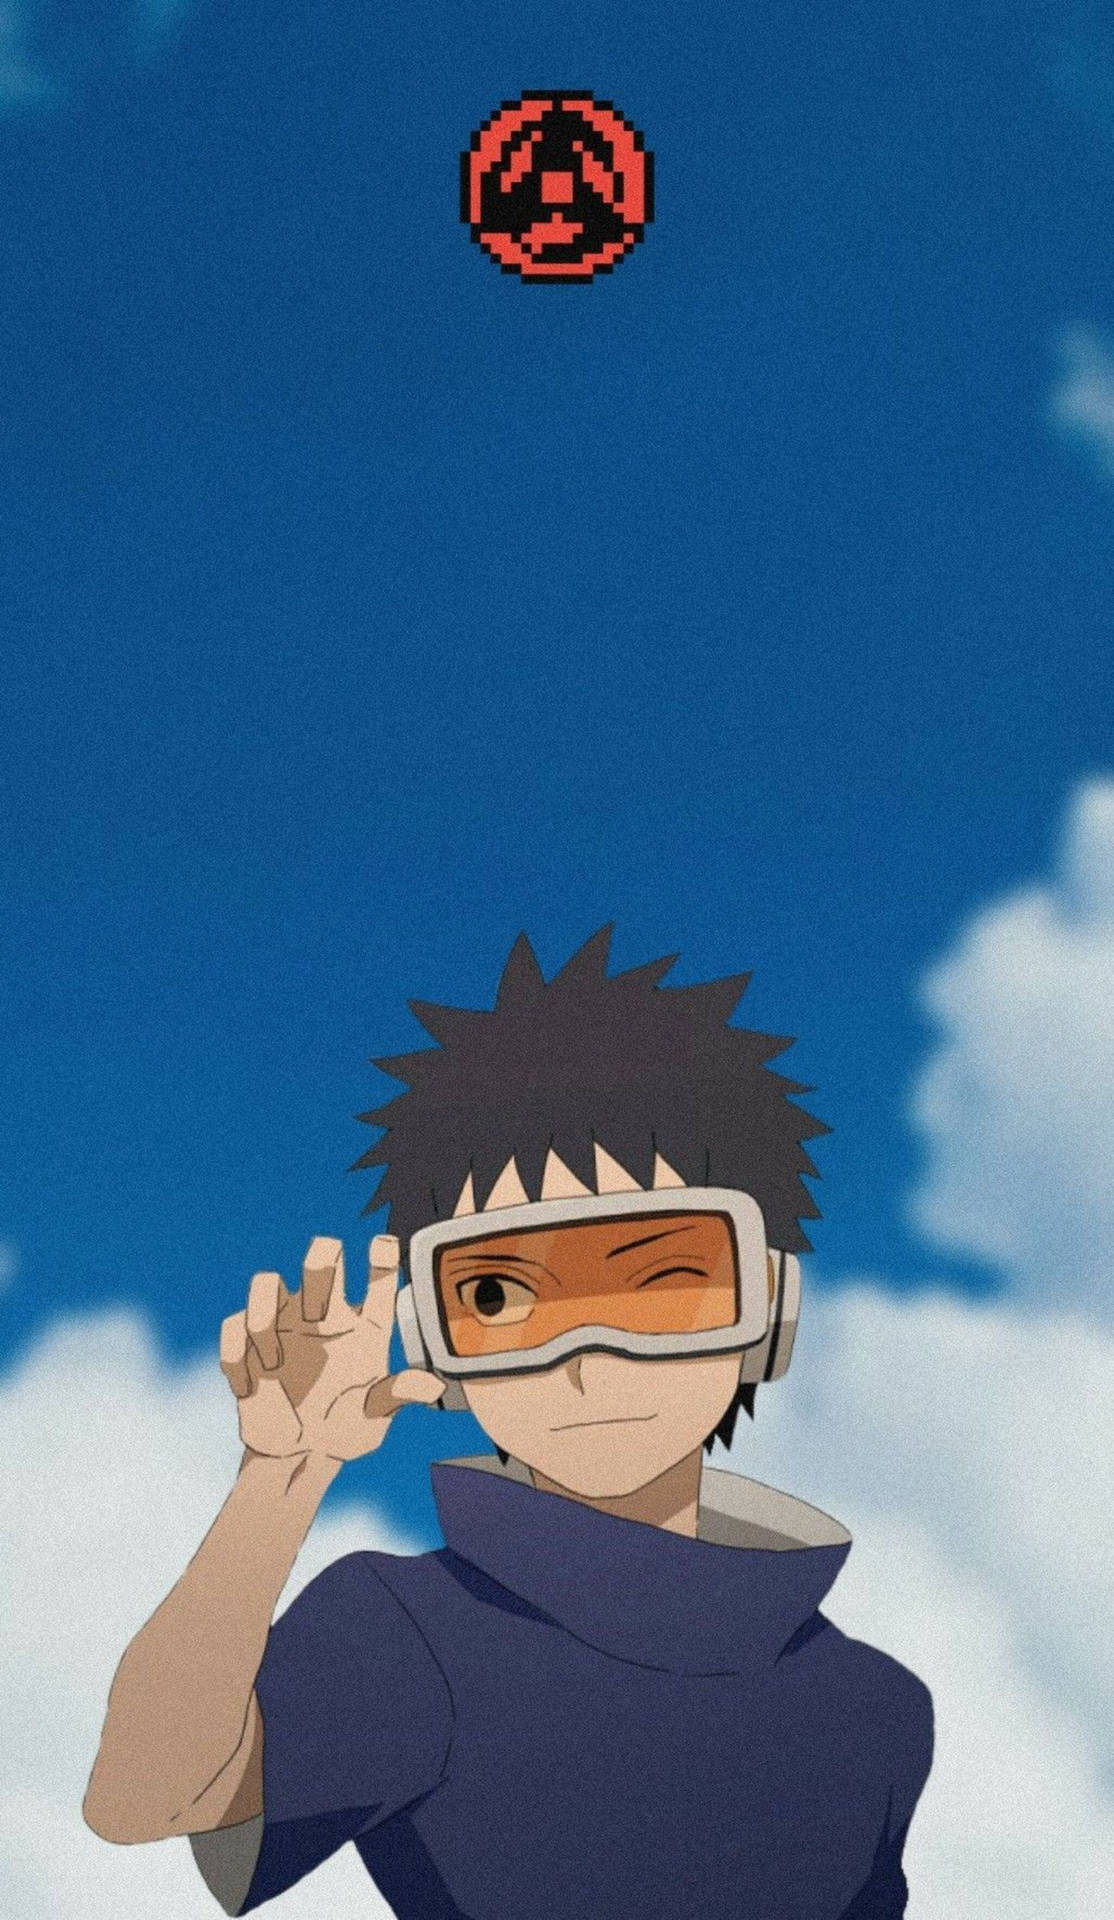 A Young Obito Showing Strength and Courage Wallpaper